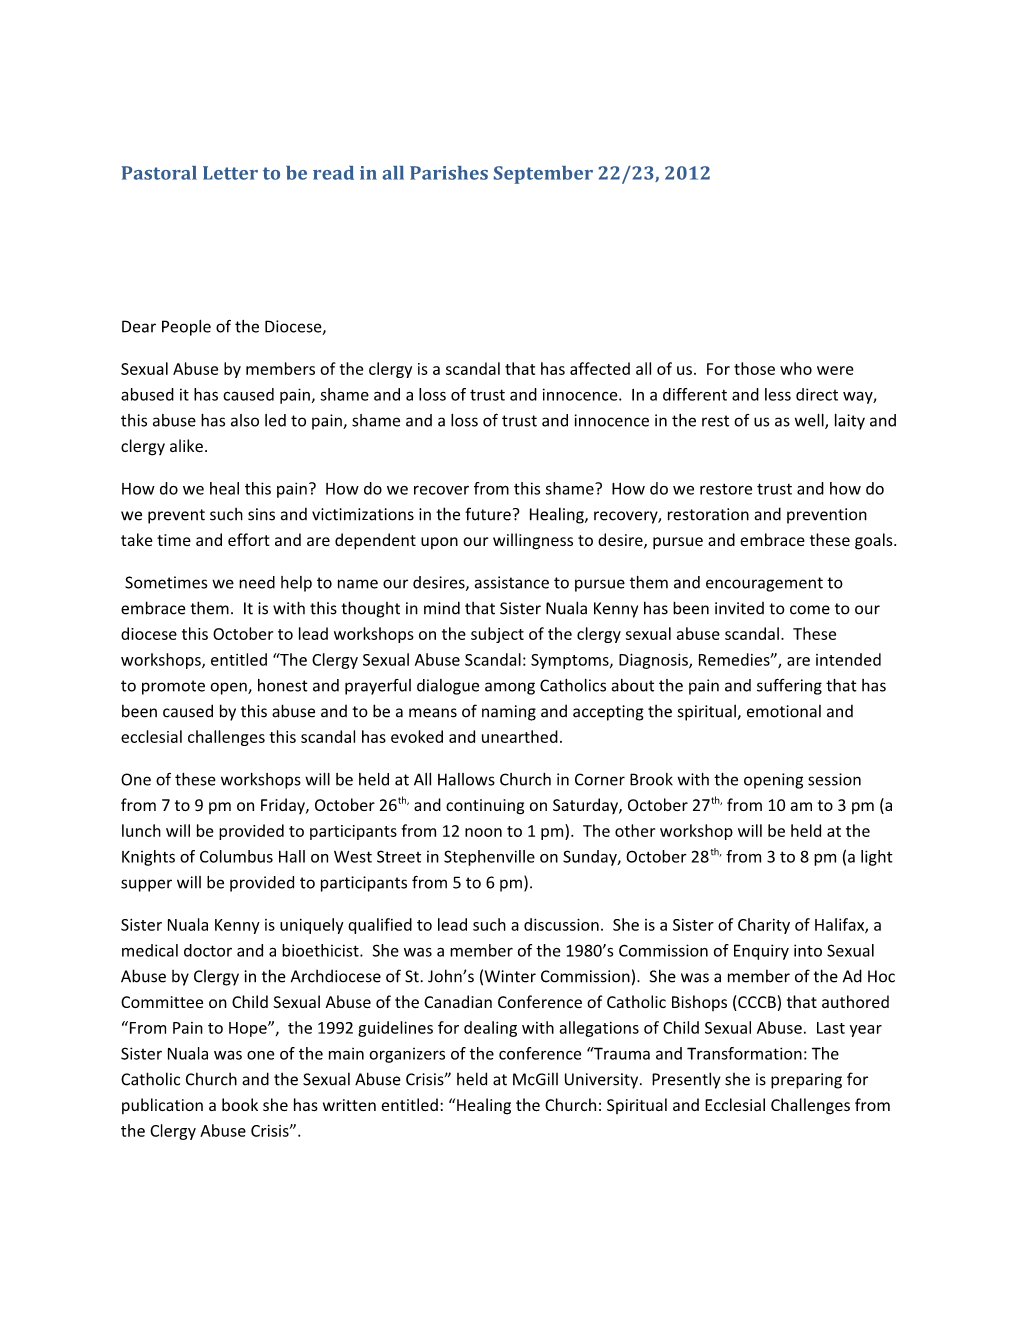 Pastoral Letter to Be Read in All Parishes September 22/23, 2012